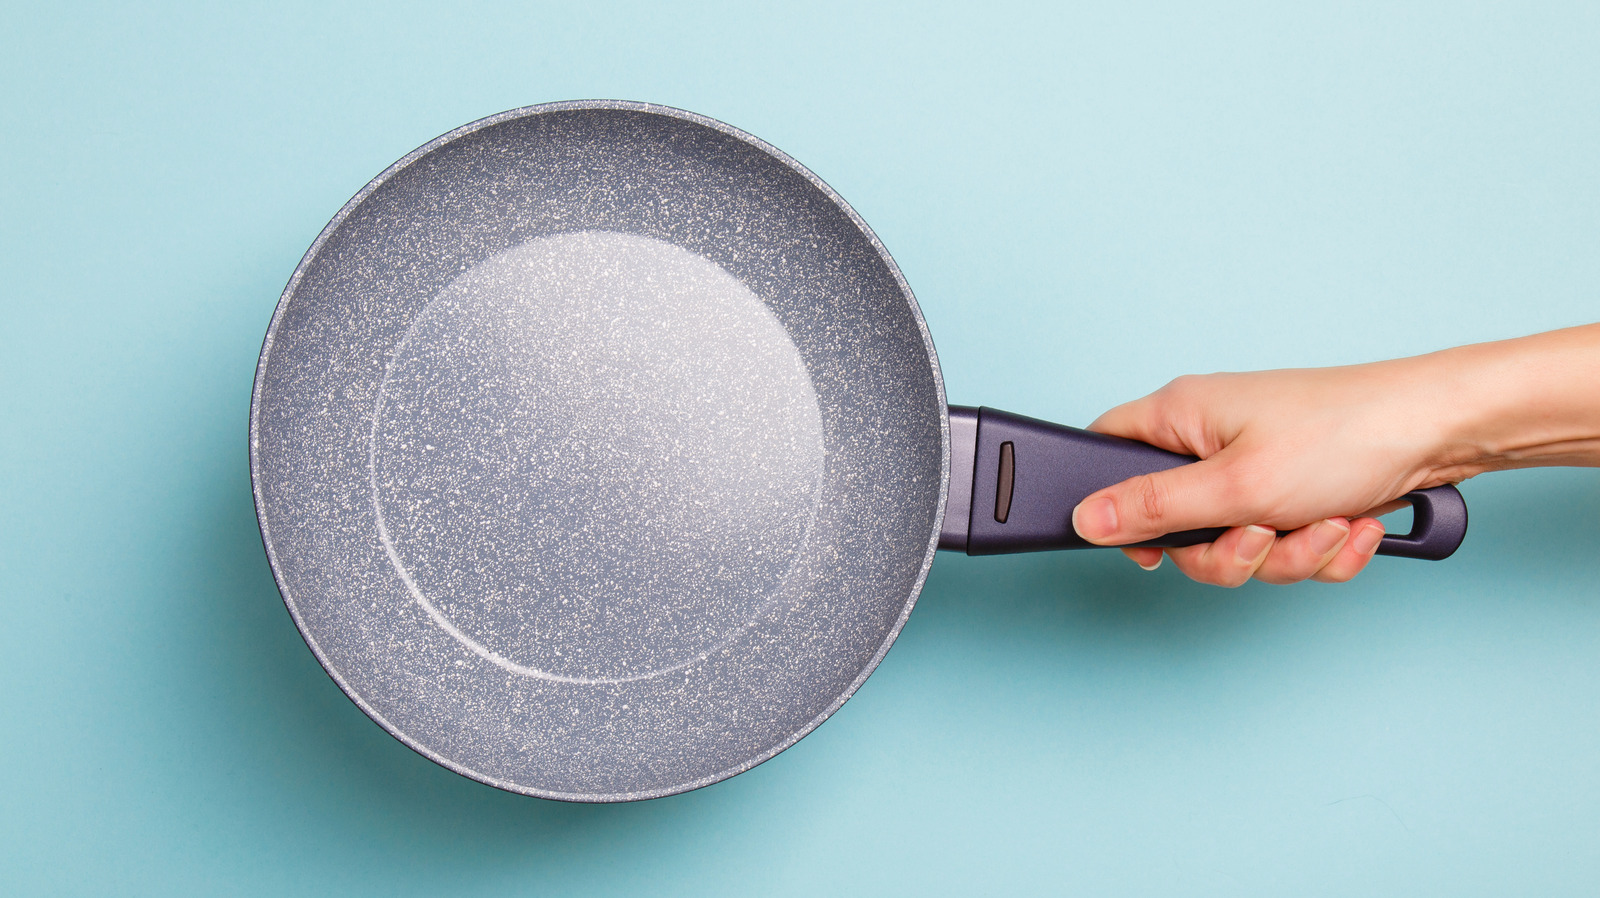 Ceramic Cookware: What Is It And Which Is Best?